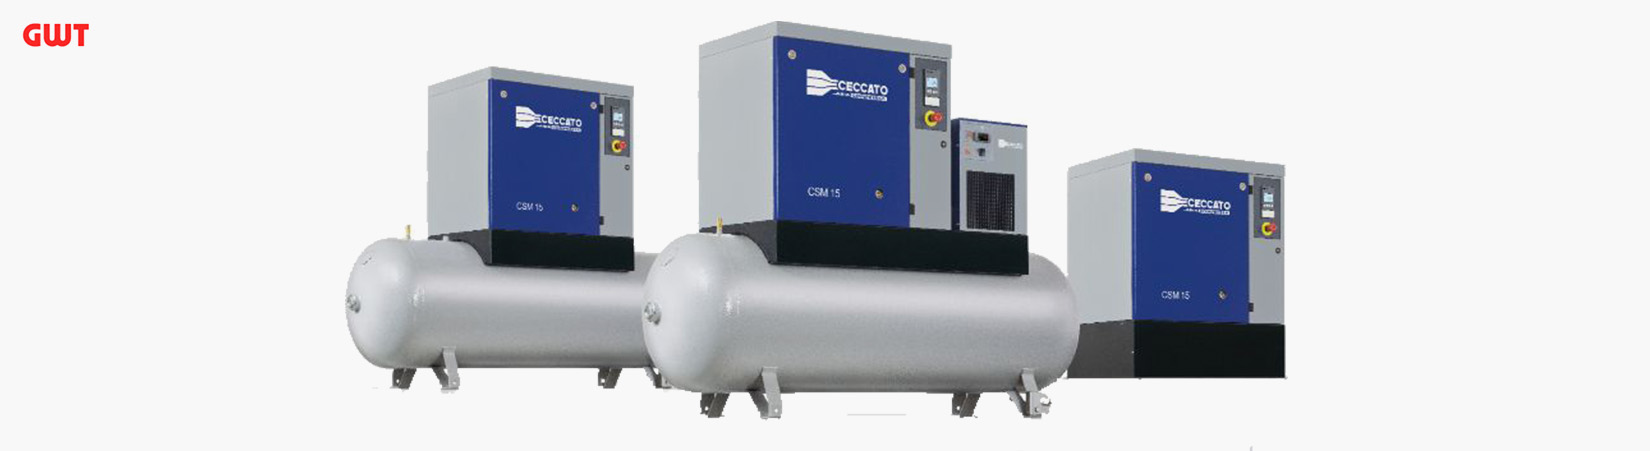 A Compressed Air Receiver Tanks